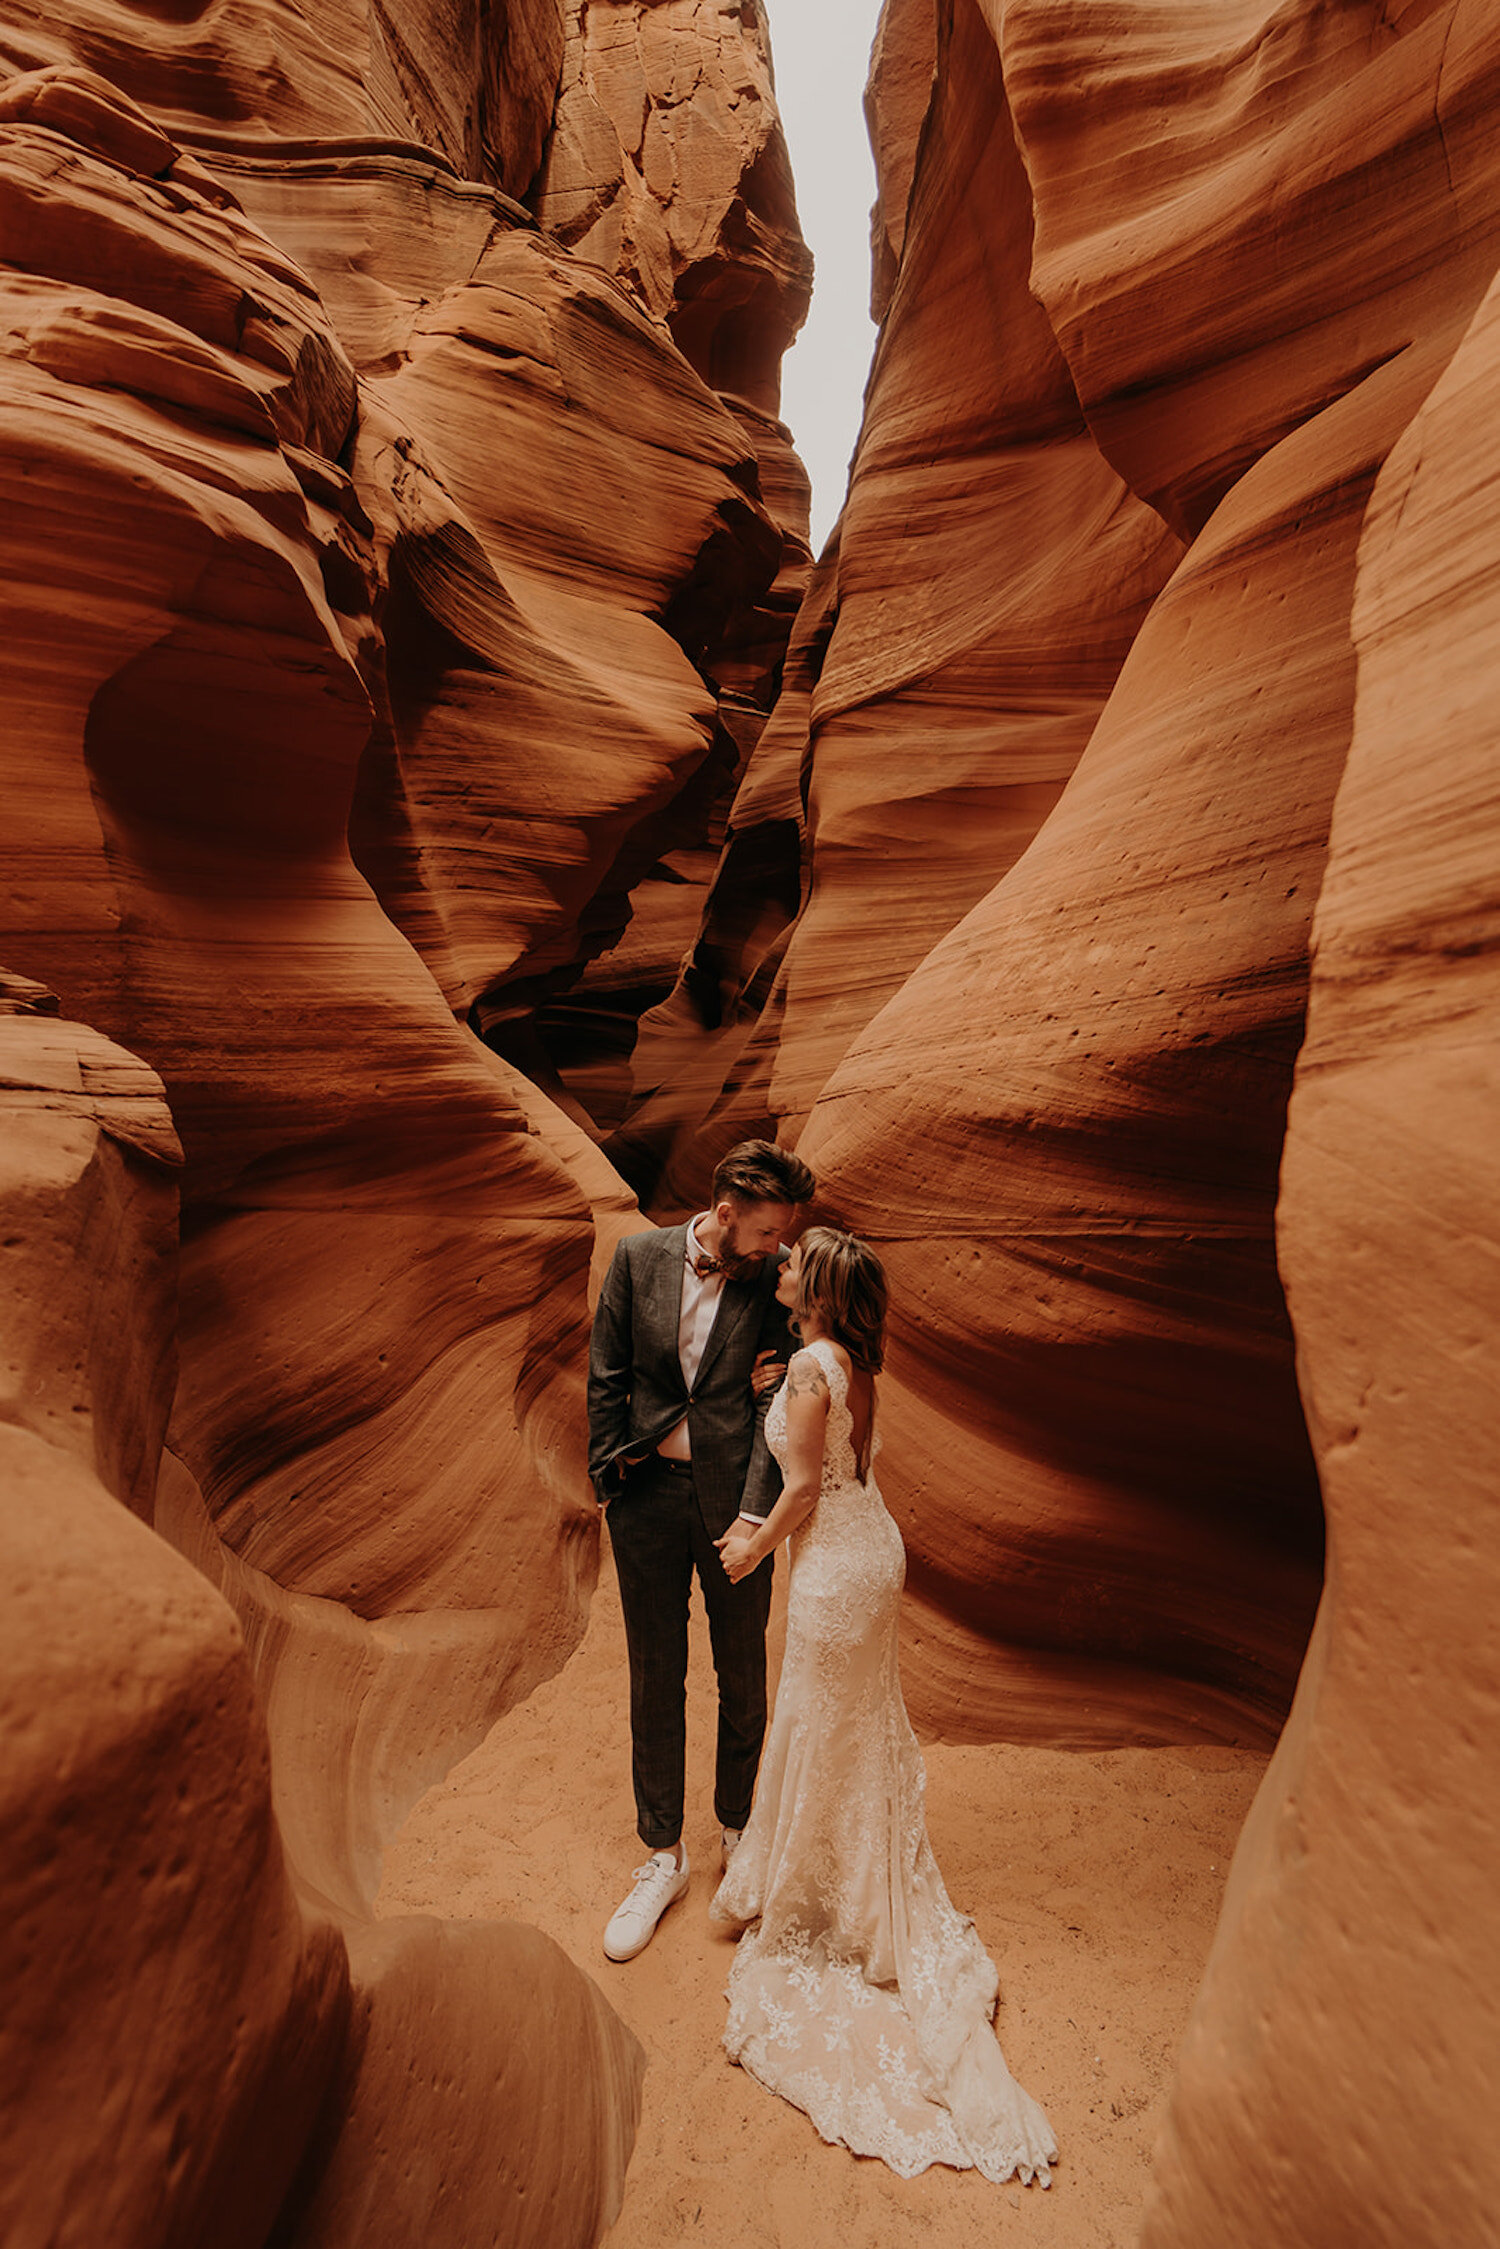 Bride and groom pose together in the canyon of Antelope Canyon during their Arizona elopement